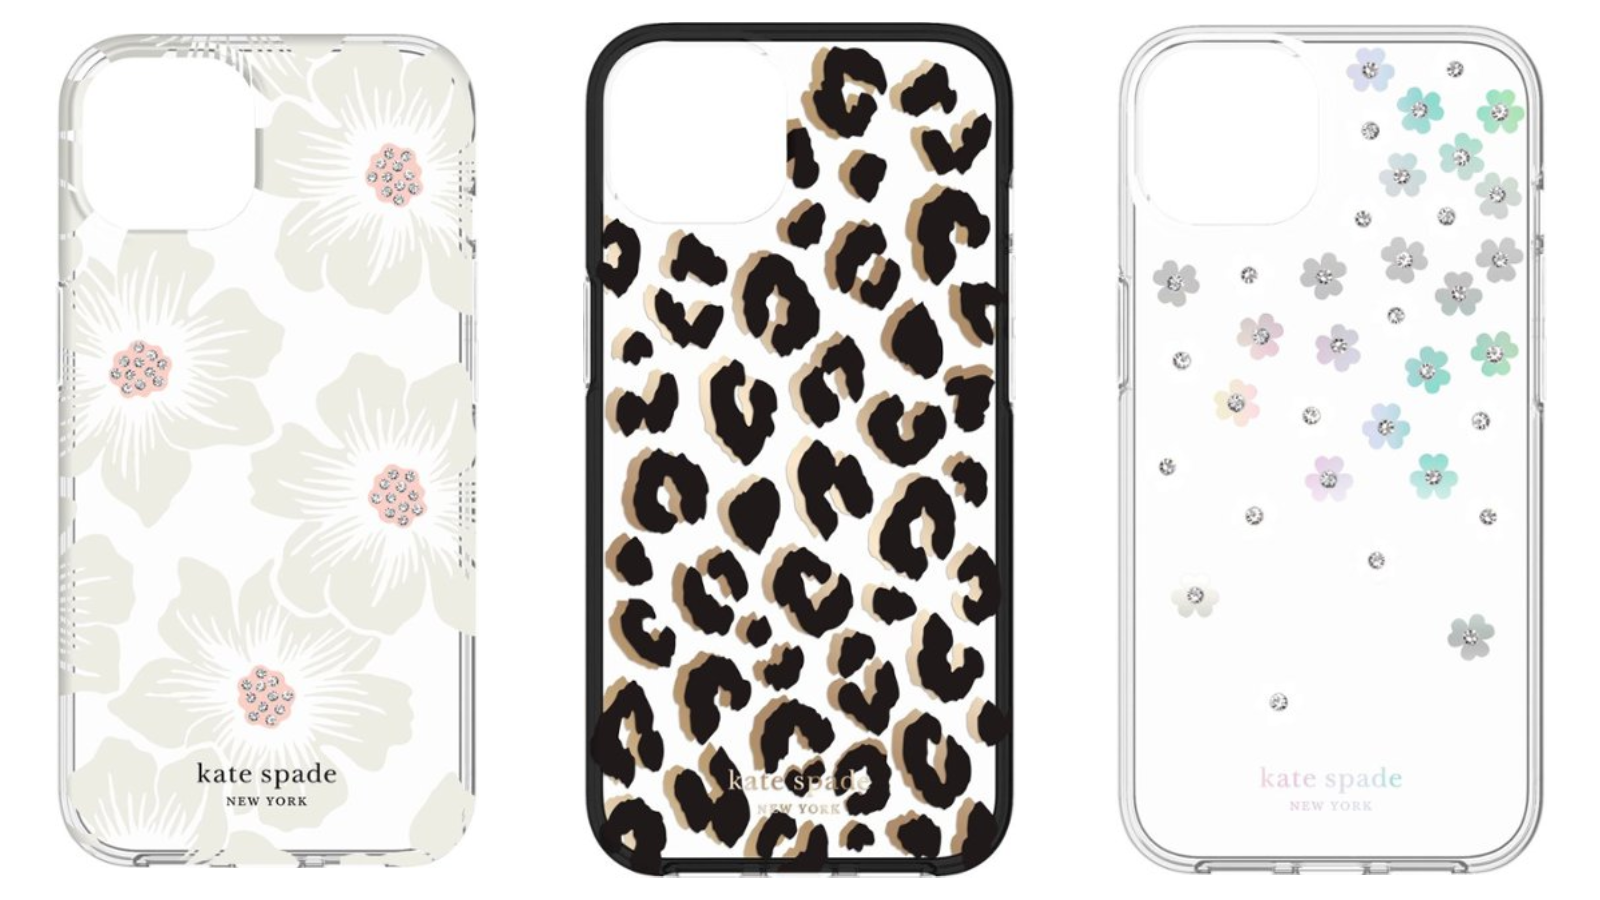 iPhone 13 cases worth buying: OtterBox, Casetify, Apple and more